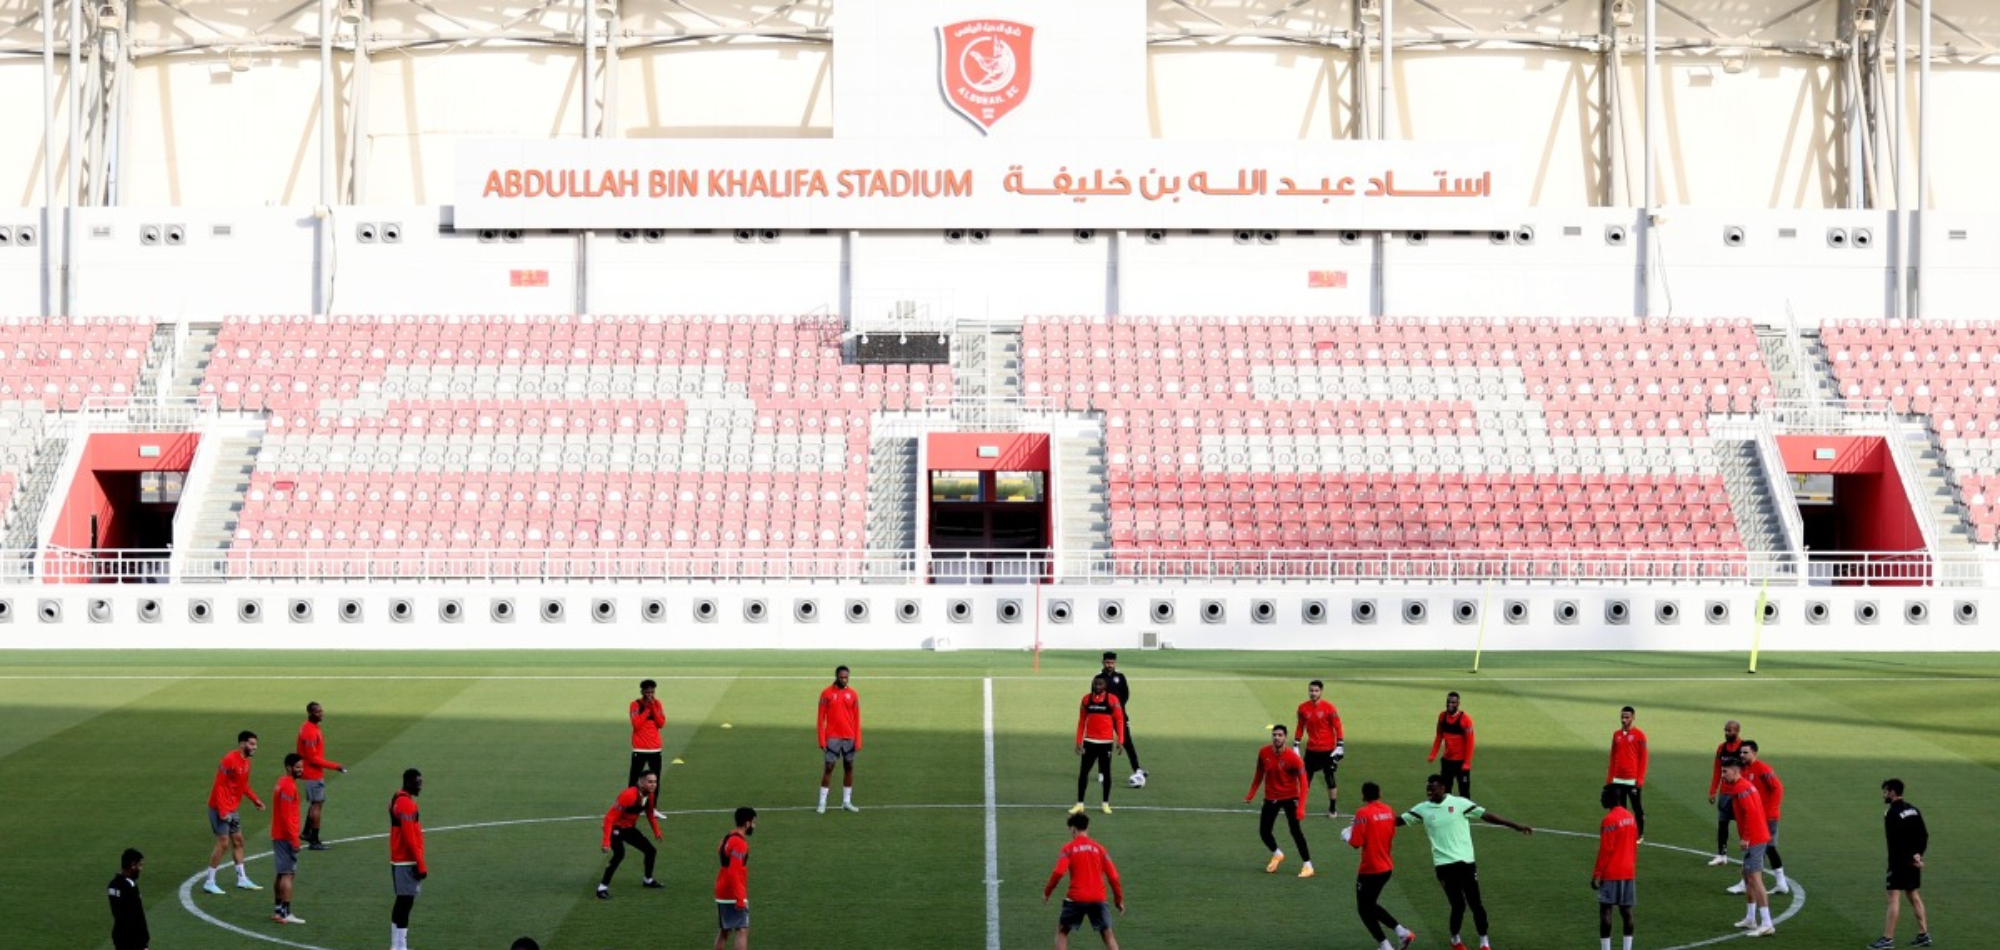 Home rivals Al Duhail, Al Rayyan face off in ACL Round of 16